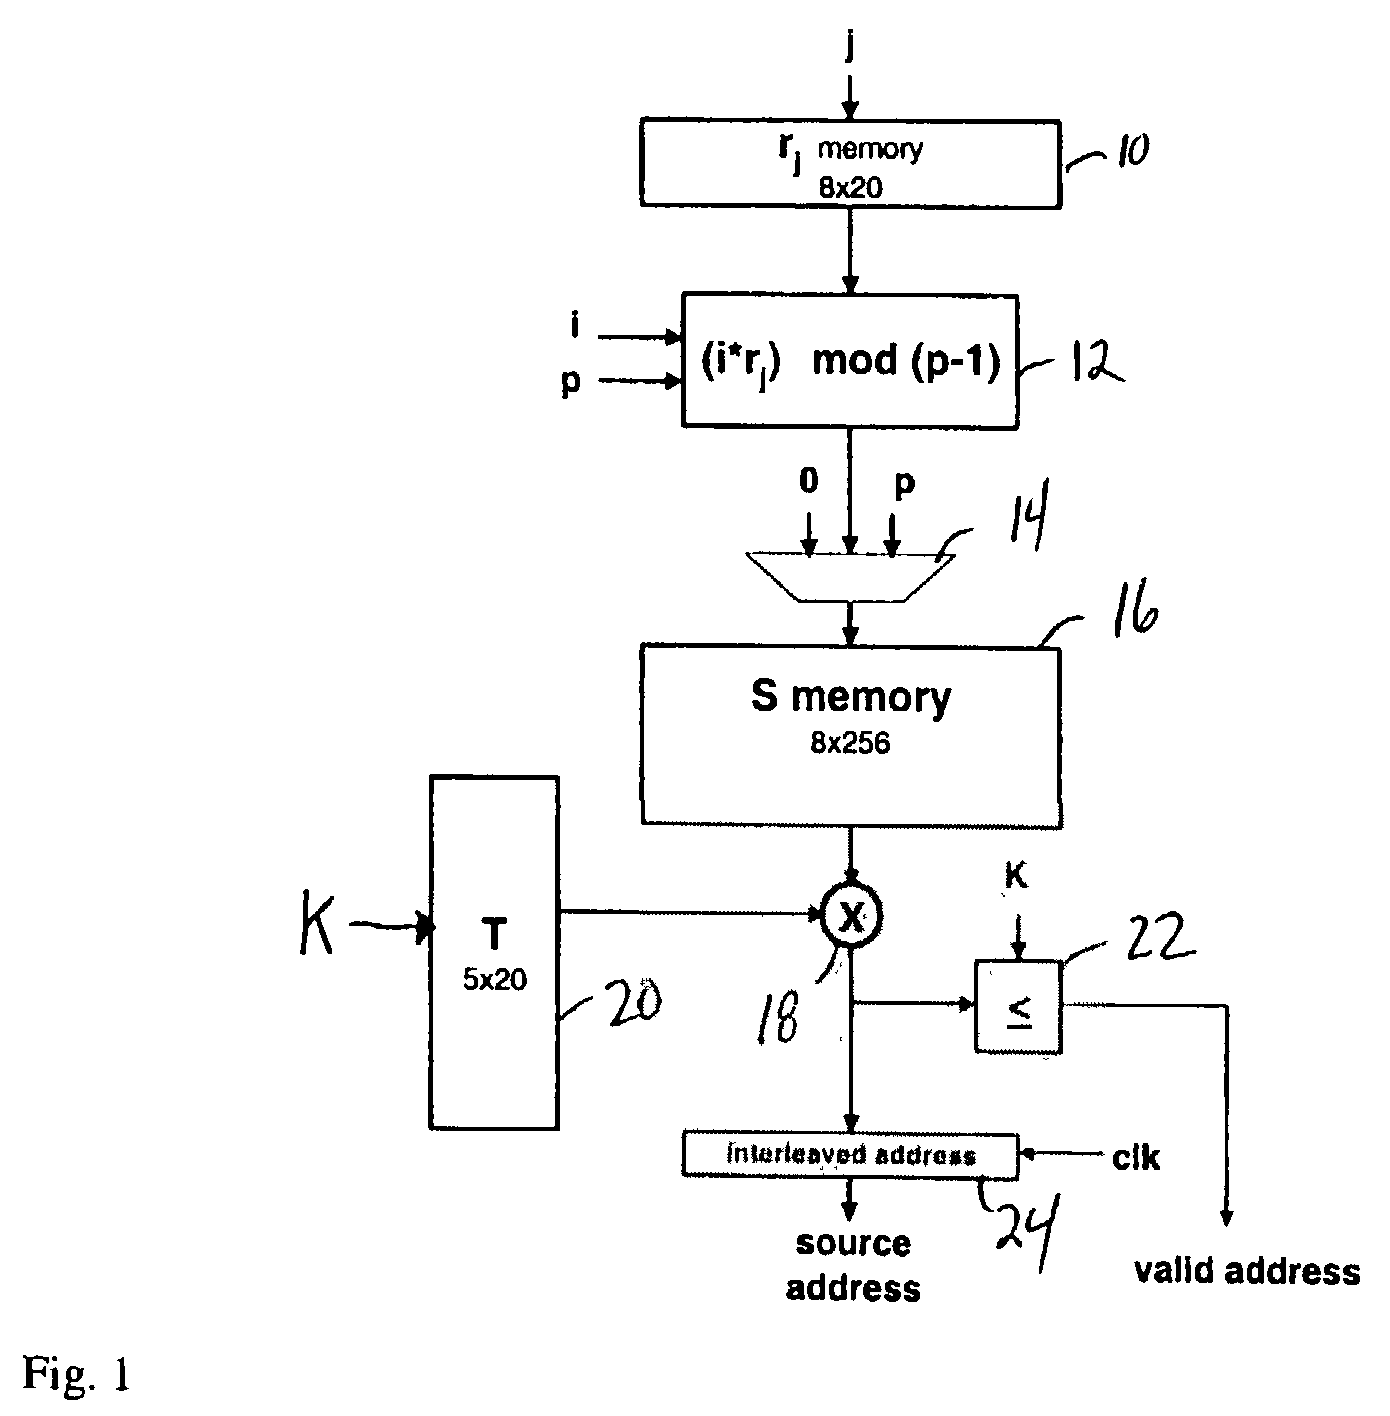 Method and apparatus for generating an interleaved address